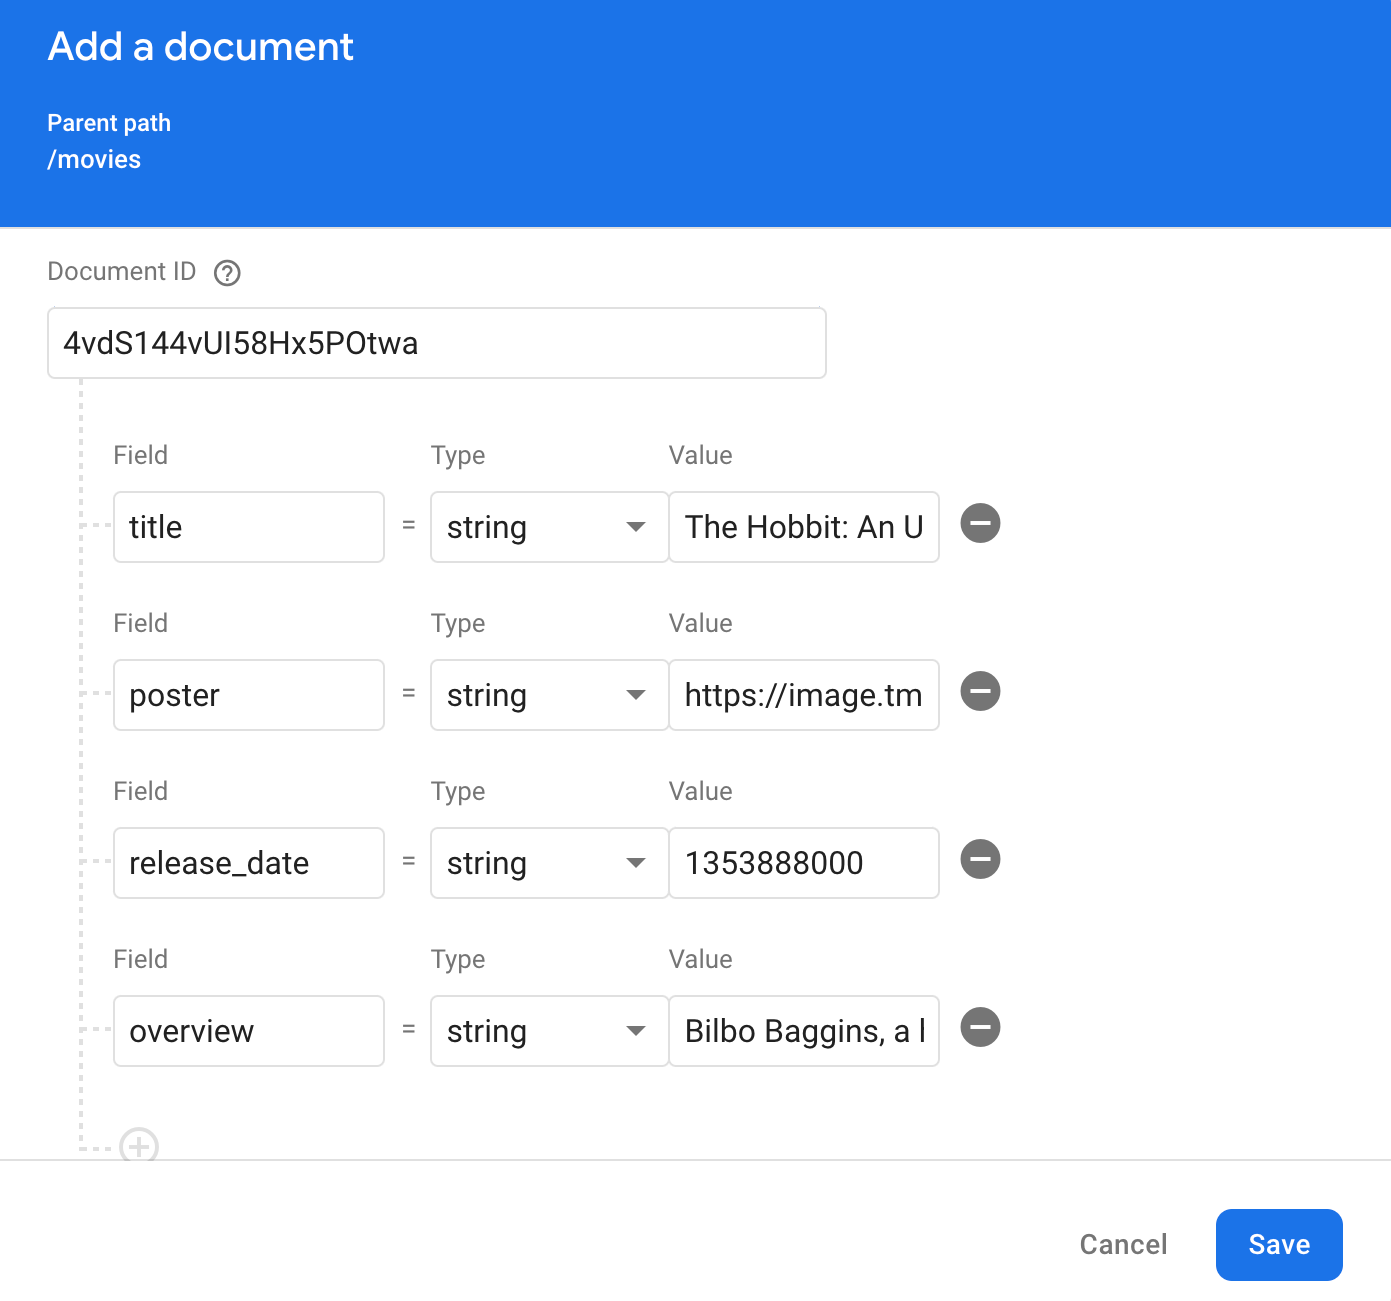 Adding a document to Firebase